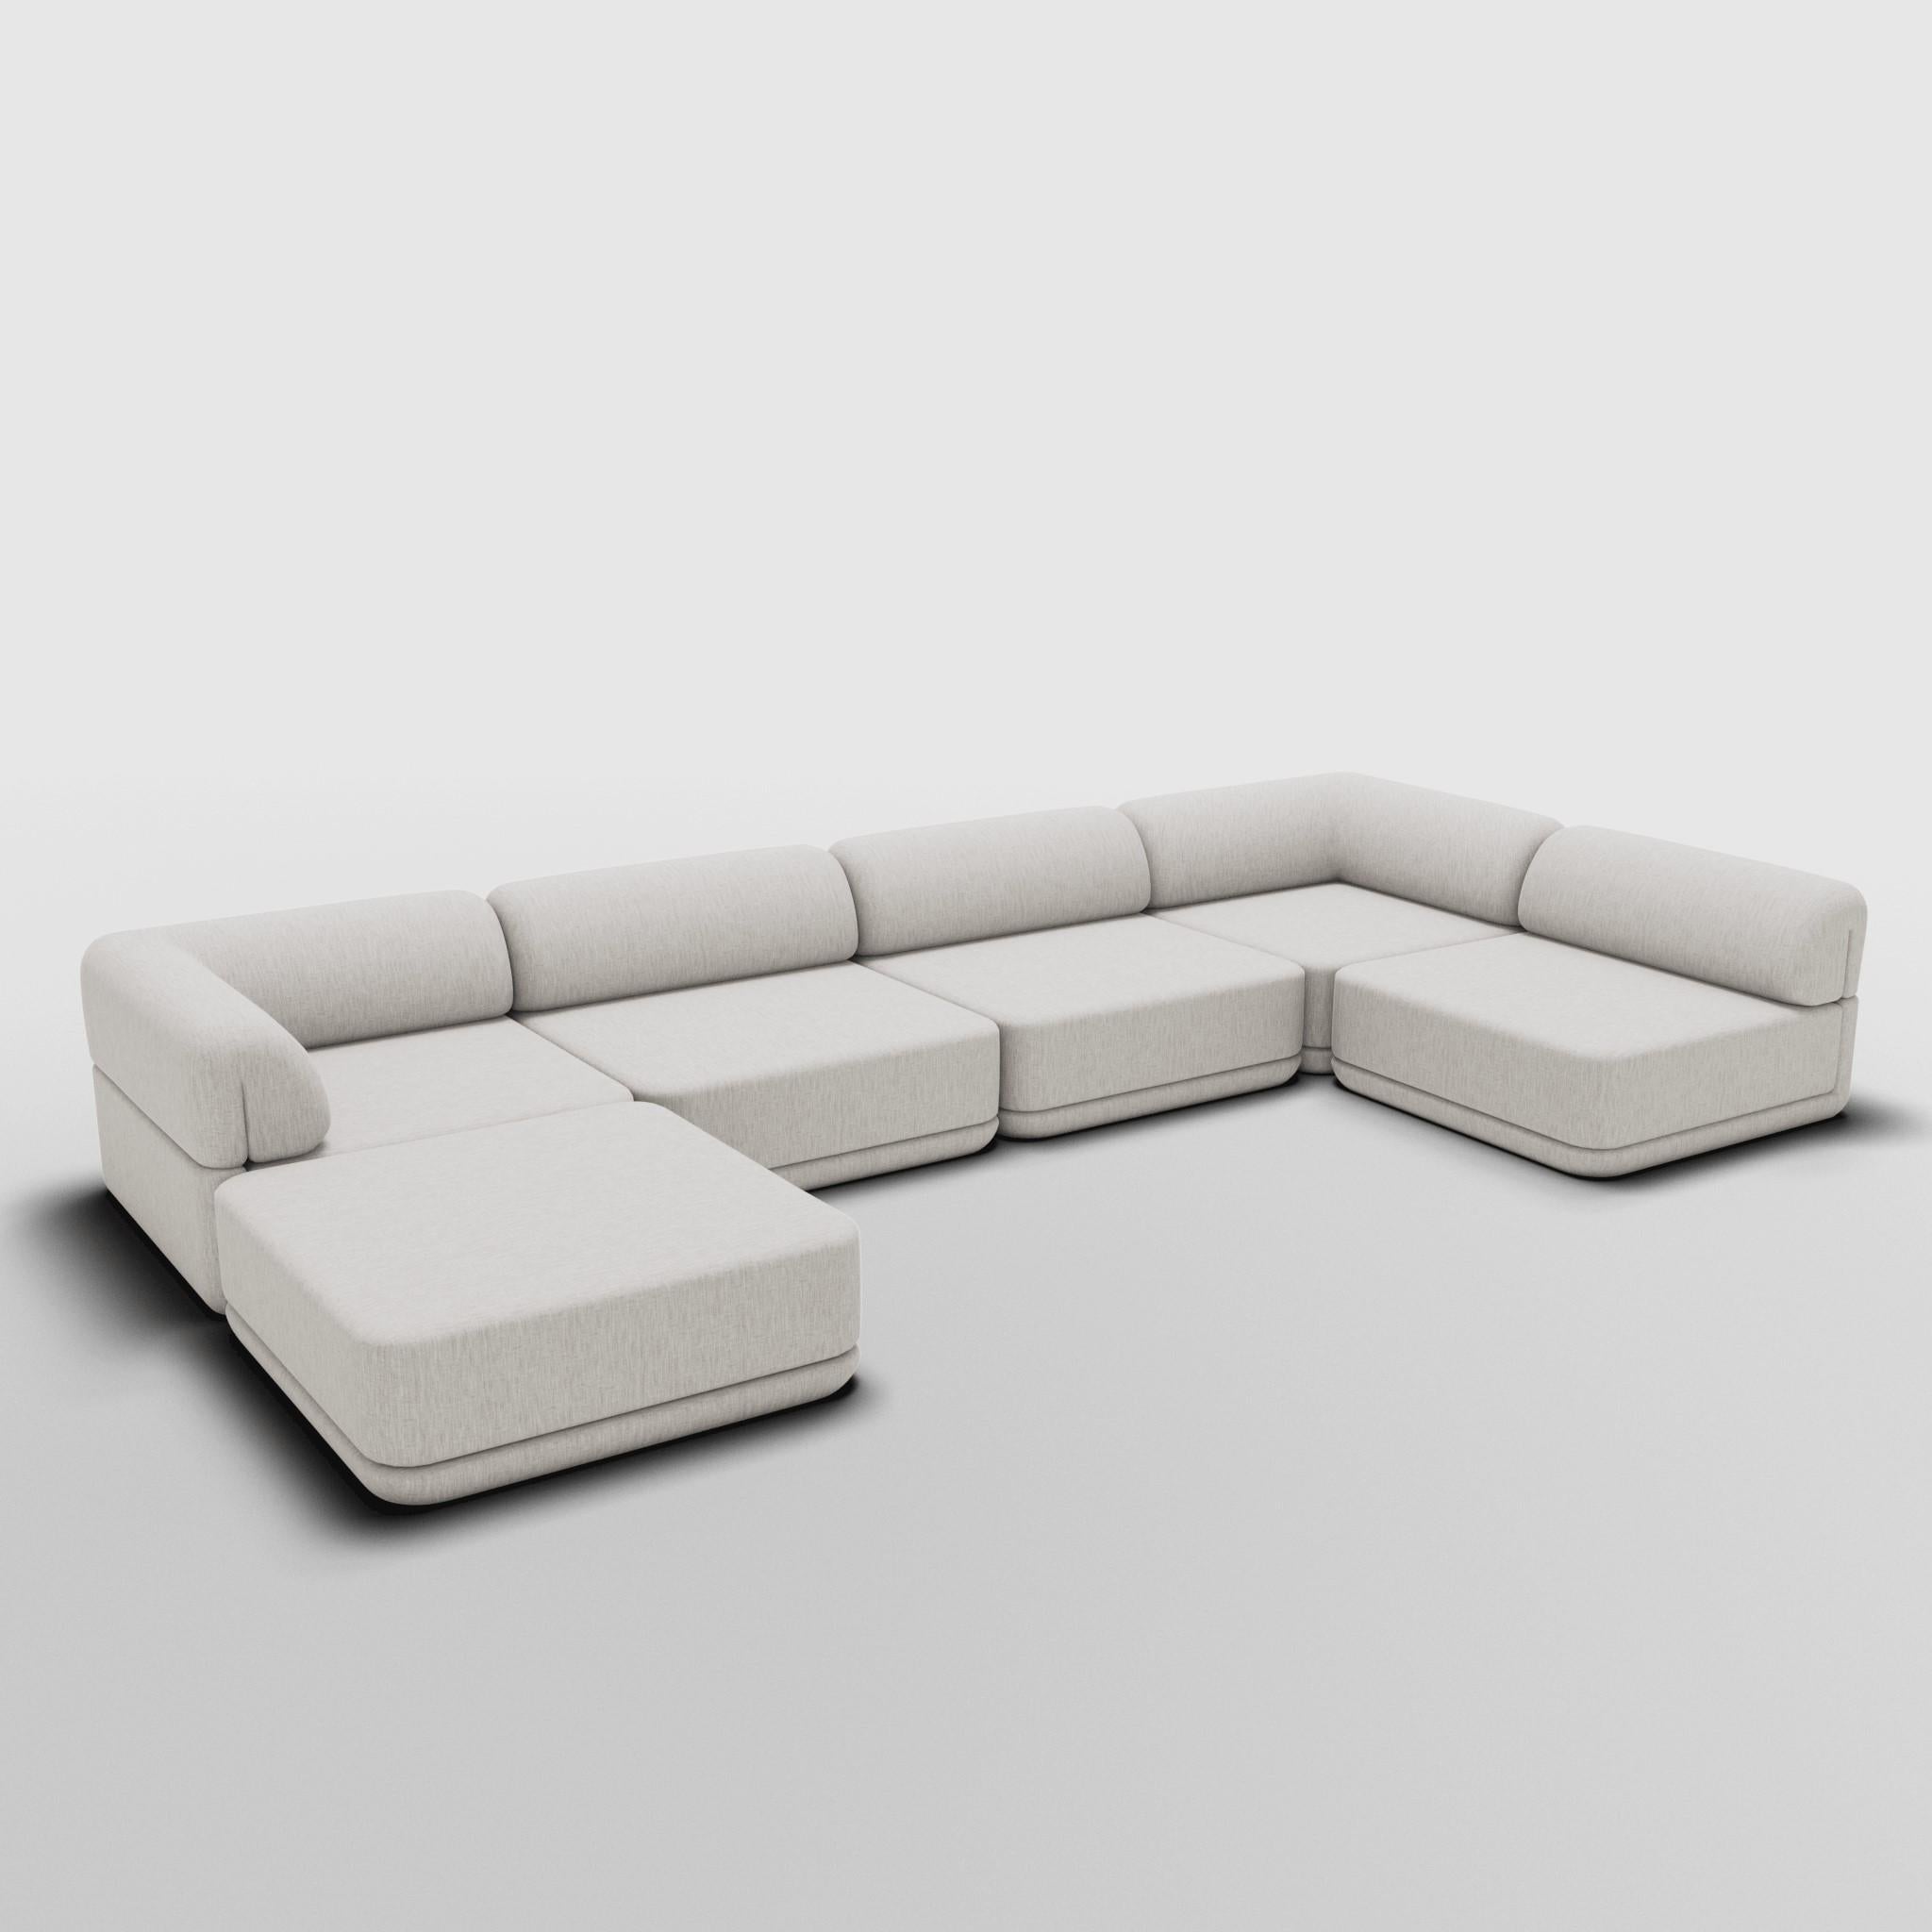 Bouclé The Cube Sofa - Low Lounge Sectional For Sale